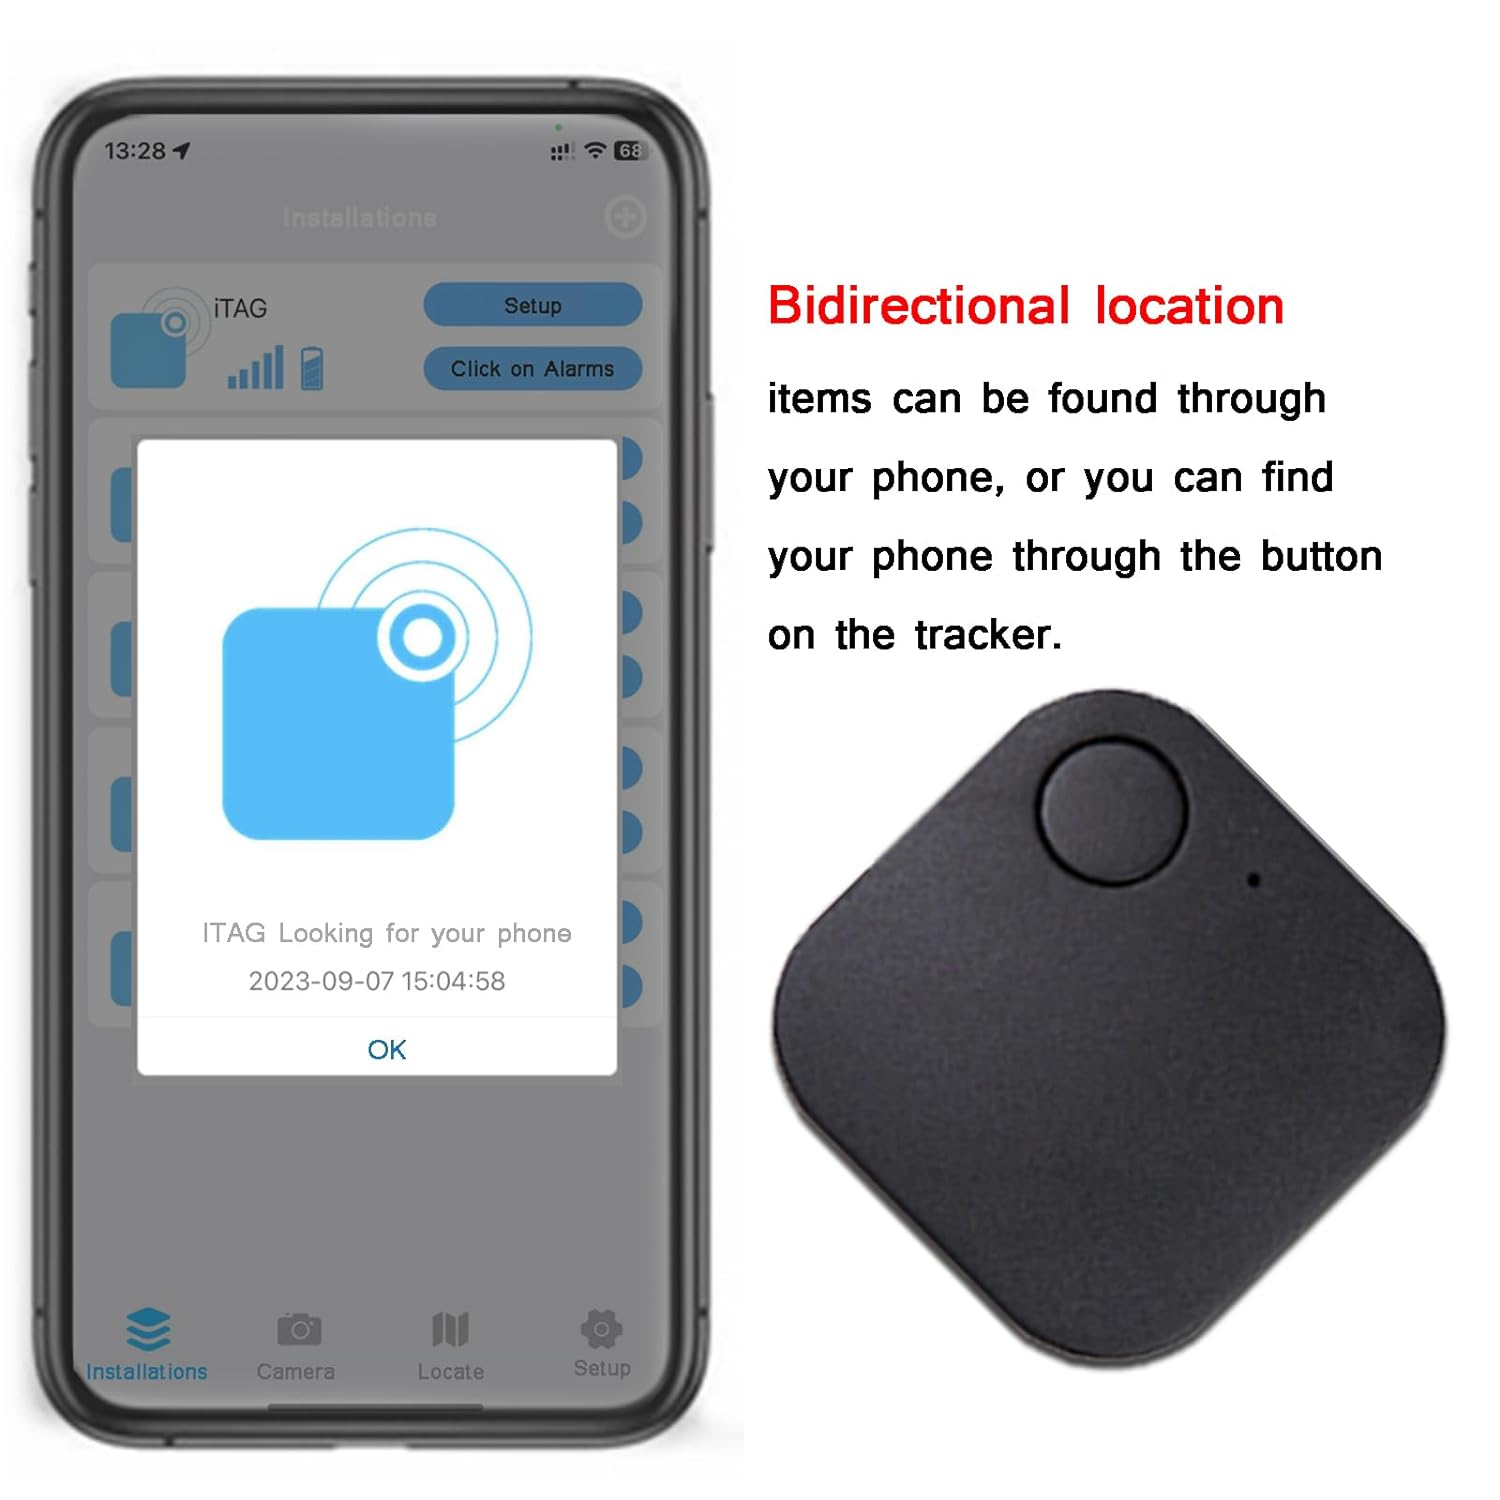 Mini Air Tag Holder Keychain,Smart Dog Tiles Tracker,Kids Key Finder,with iOS Android Bluetooth Anti-Lost Key Chain for Luggage Tracker,Pet, Pack, Wallets -Black